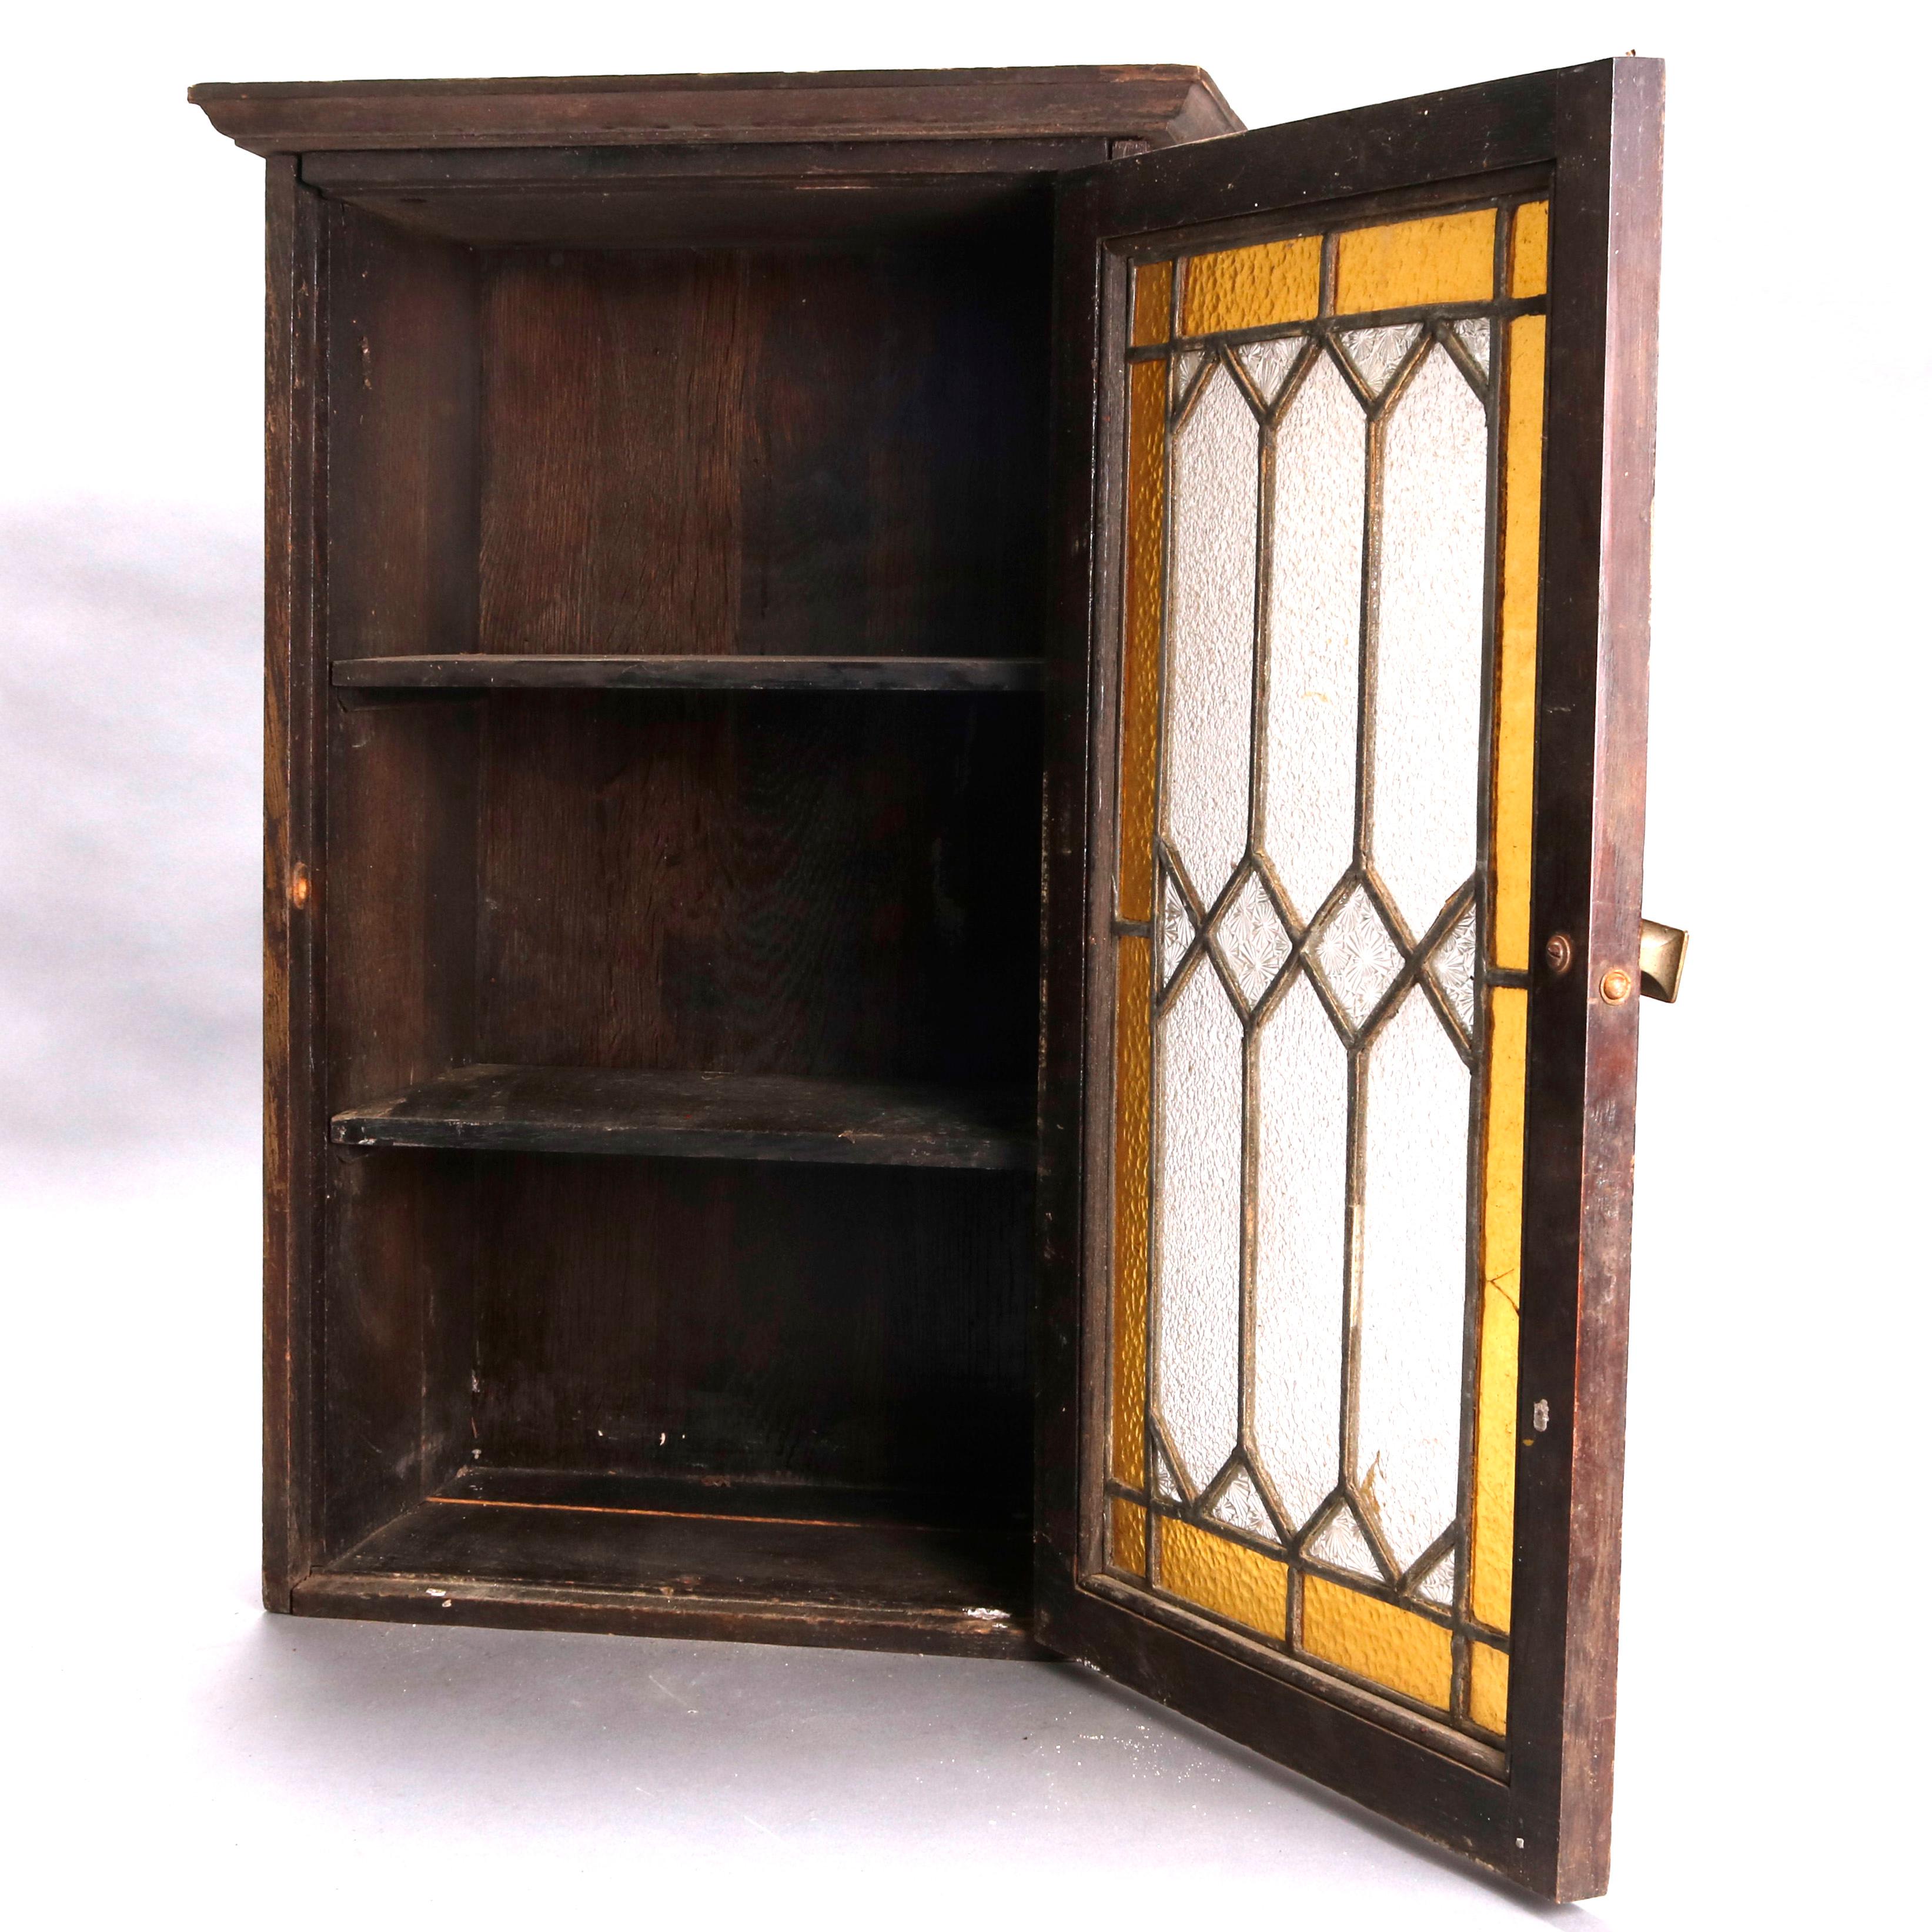 An antique Arts & Crafts mission oak wall cabinet offers single leaded glass door with square cast bronze pull, opening to shelved interior, circa 1910

***DELIVERY NOTICE – Due to COVID-19 we have employed LIMITED-TO-NO-CONTACT PRACTICES in the